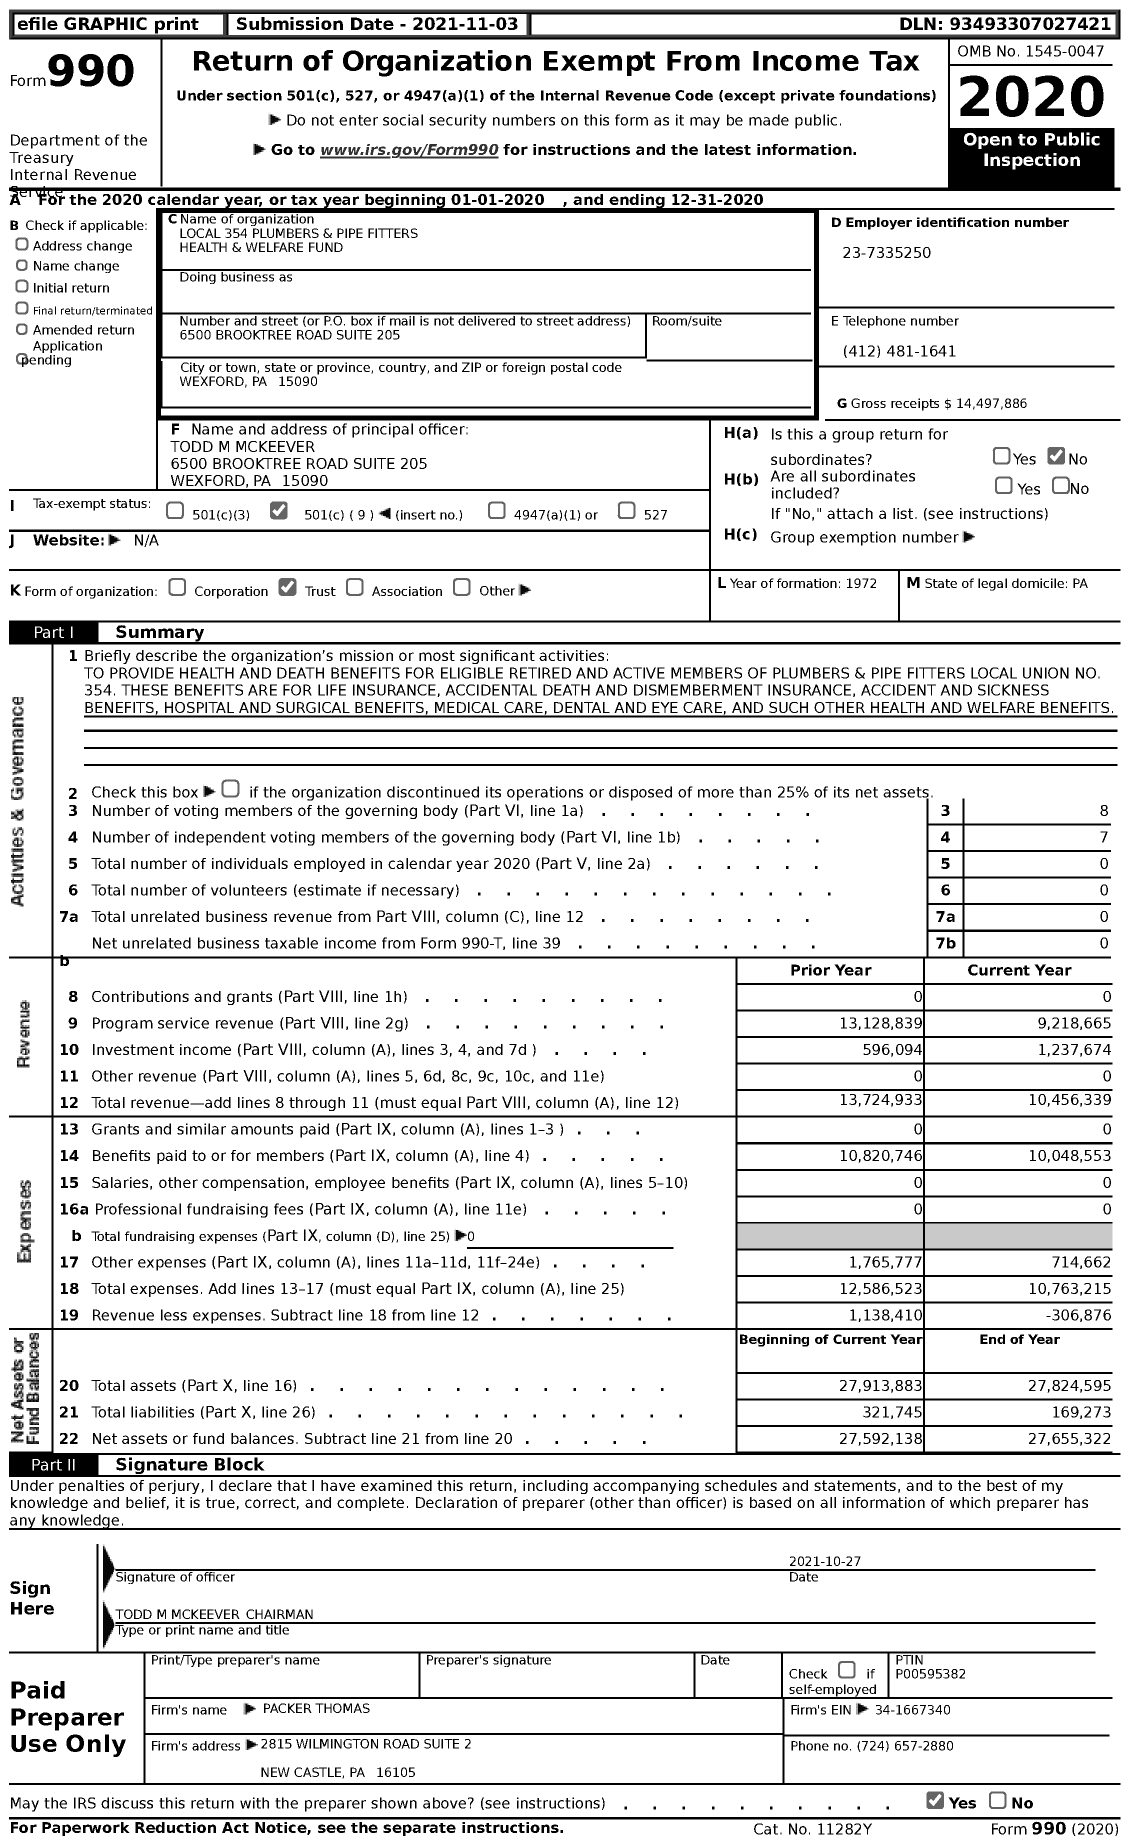 Image of first page of 2020 Form 990 for Local 354 Plumbers and Pipe Fitters Health and Welfare Fund